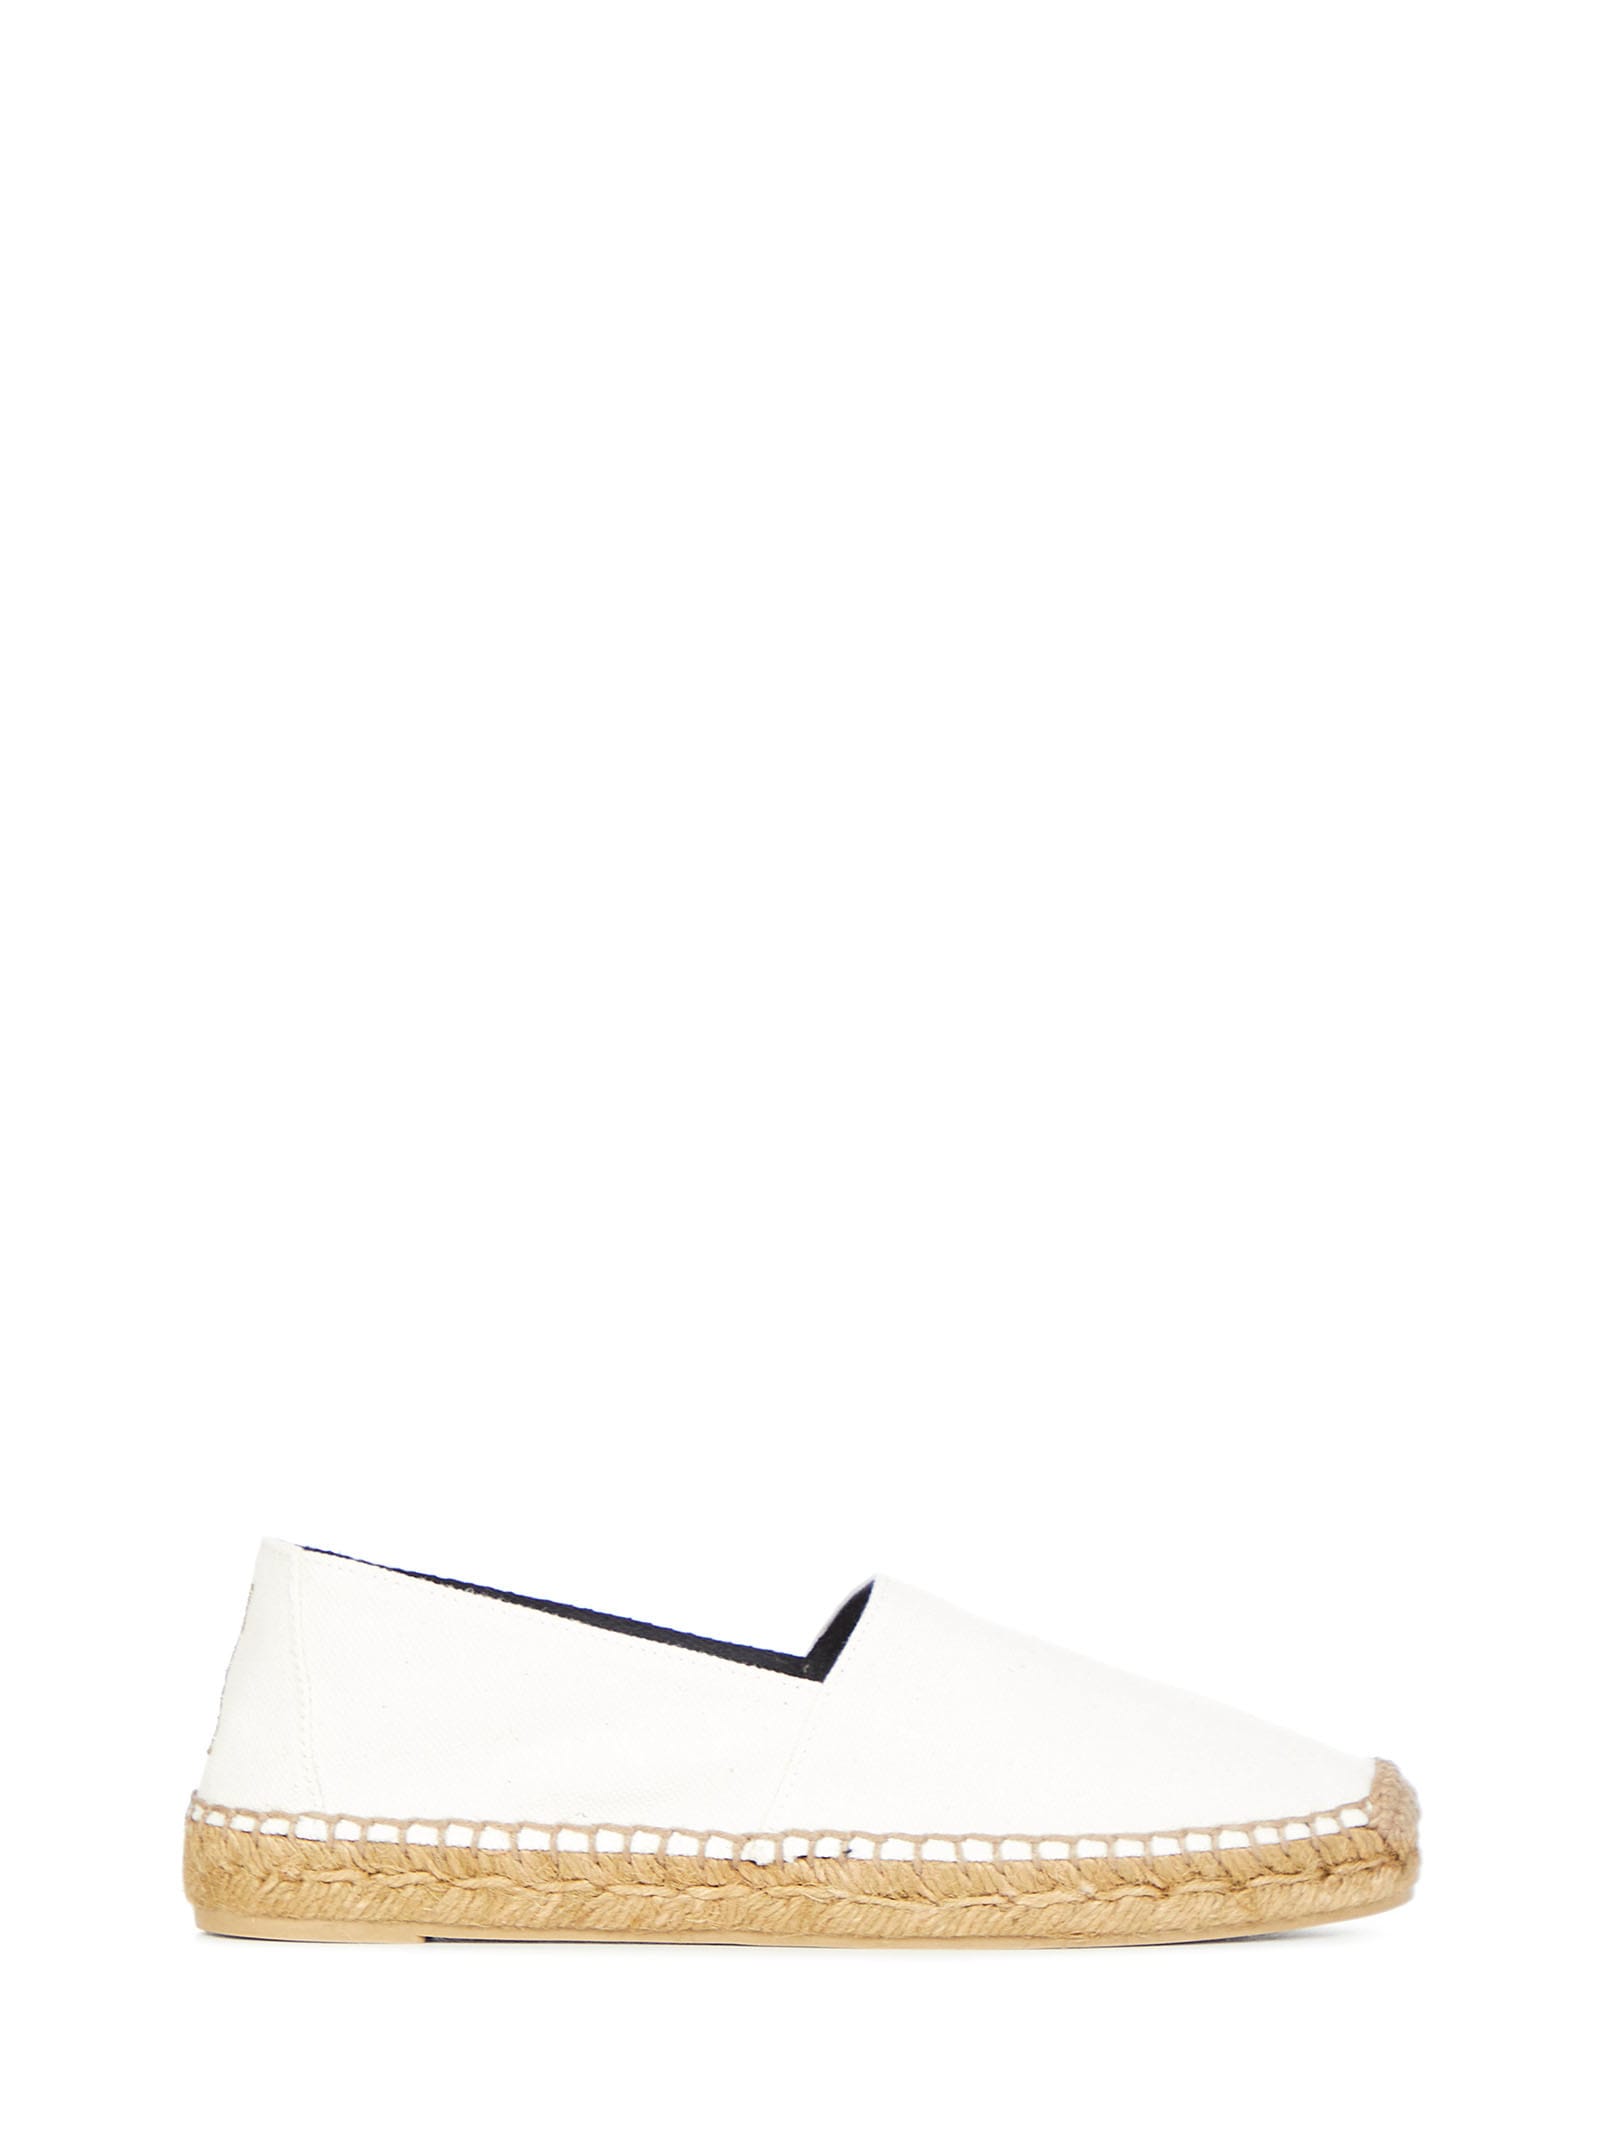 Ysl Embroidery Espadrilles